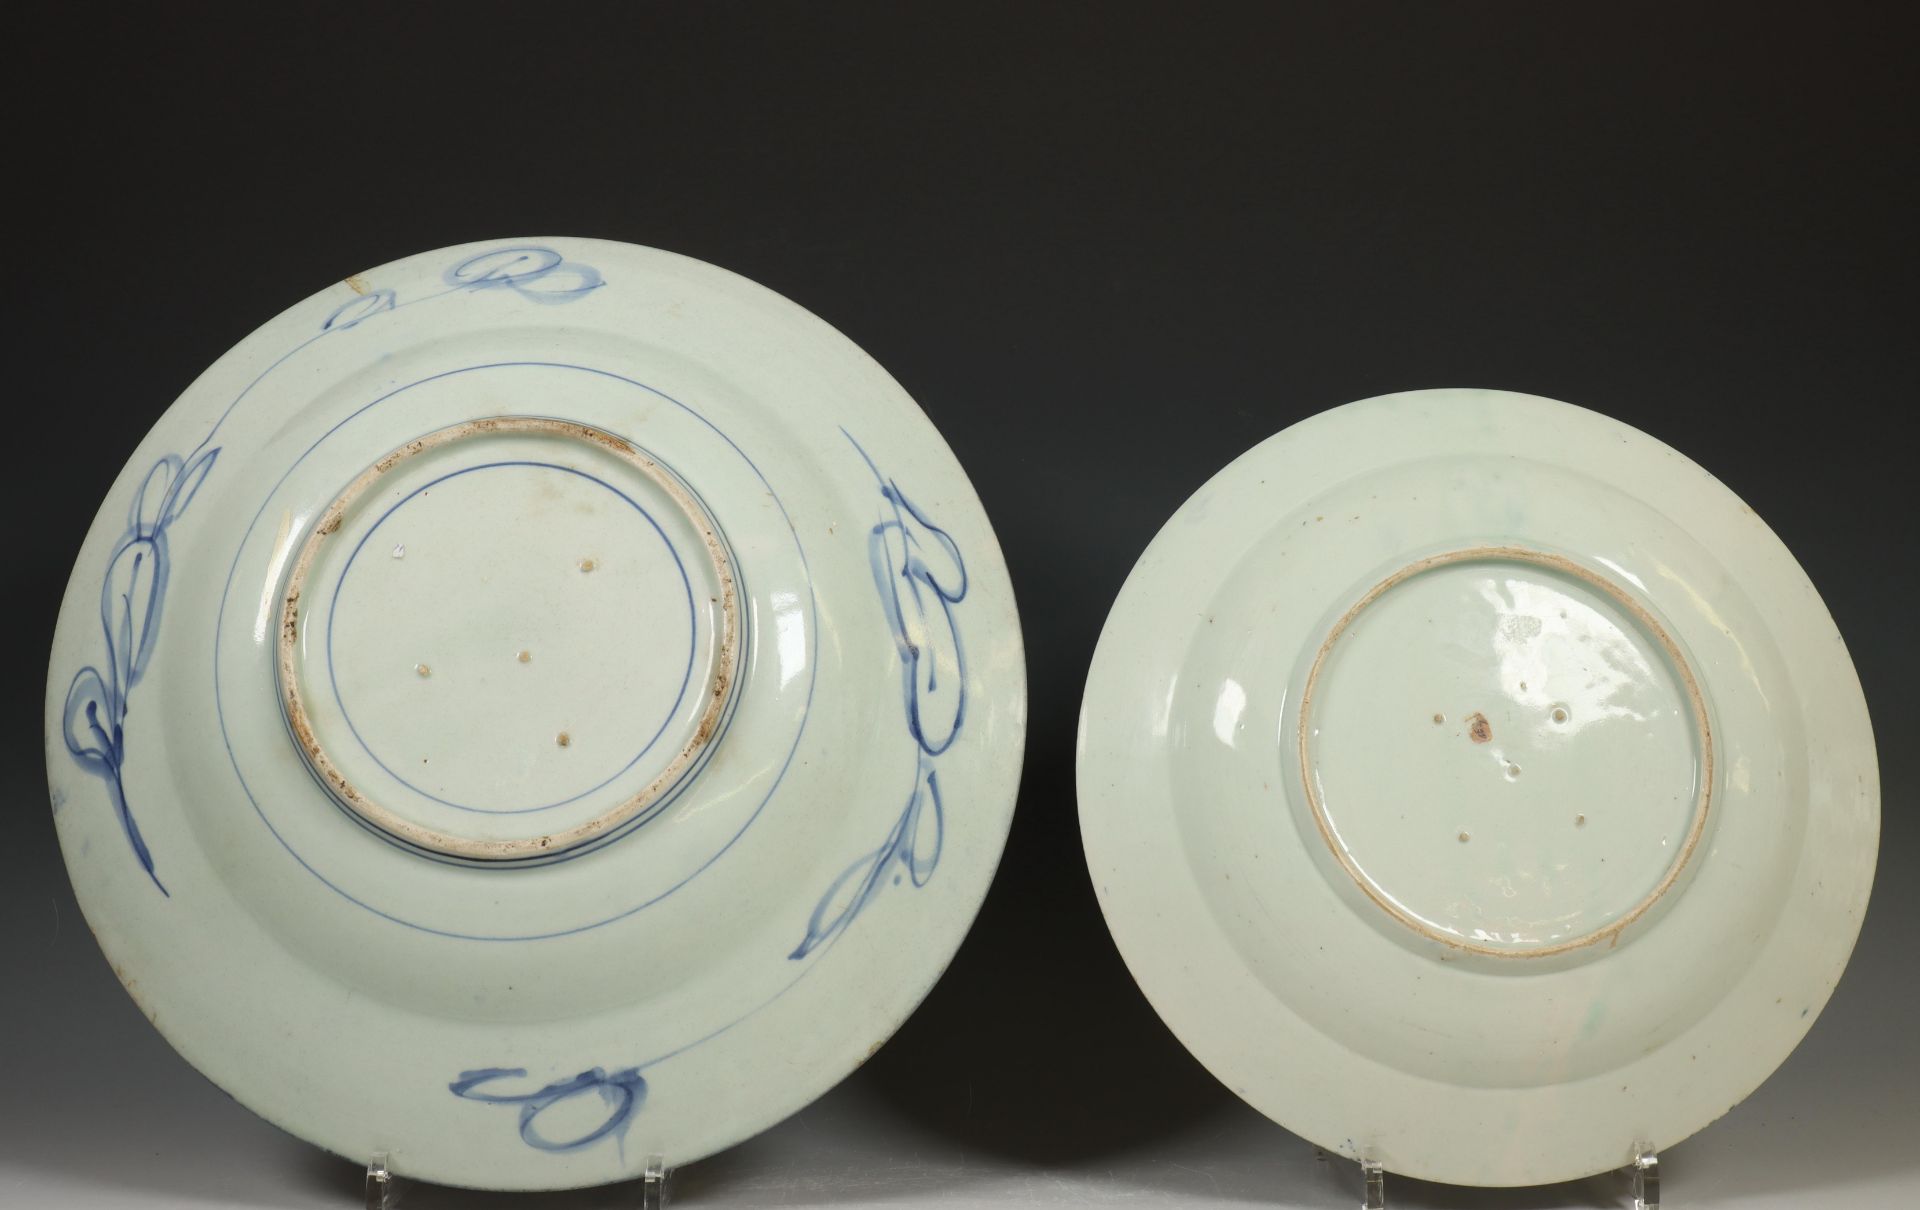 Japan, two Arita blue and white porcelain 'Kraak style' dishes, Edo period, late 17th century, - Image 2 of 2